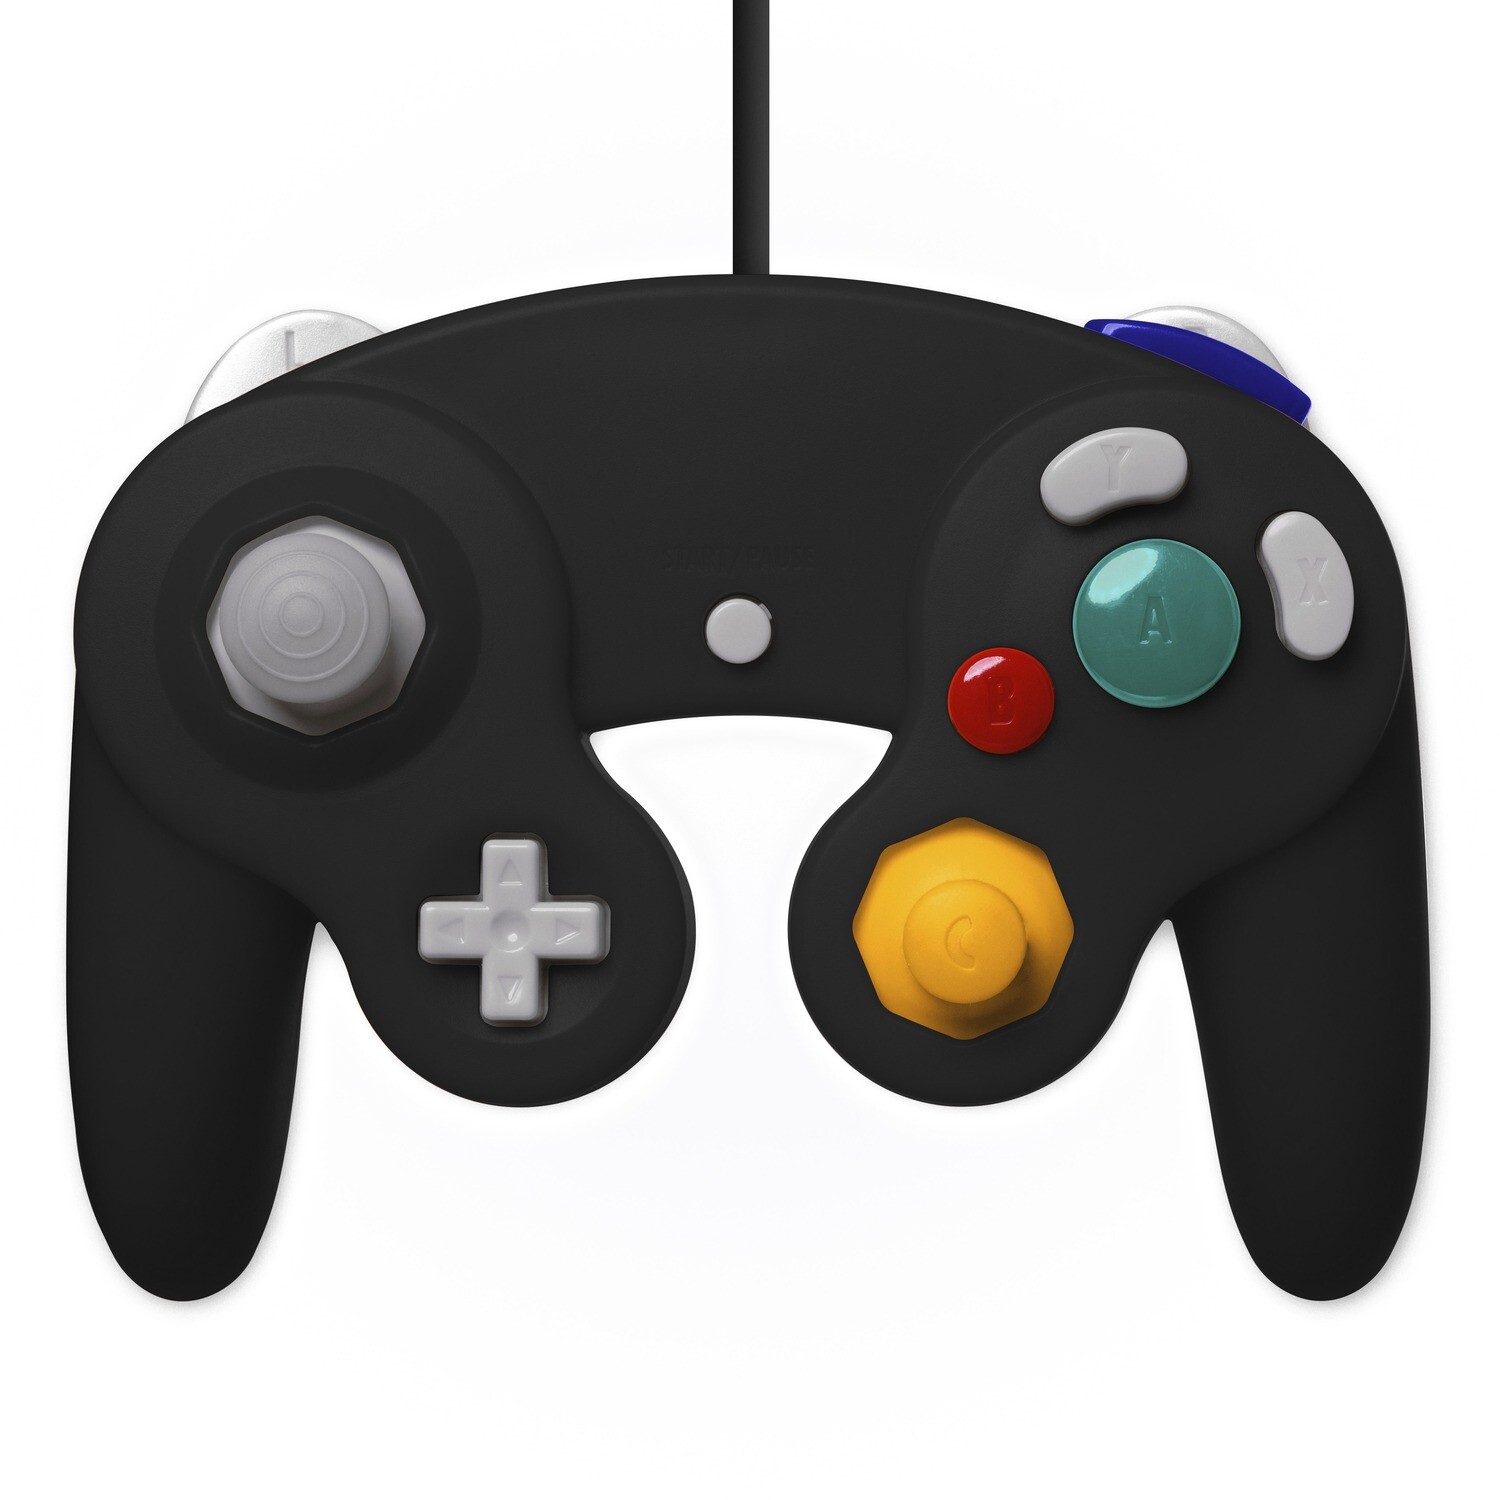 GameCube Wired Controllers